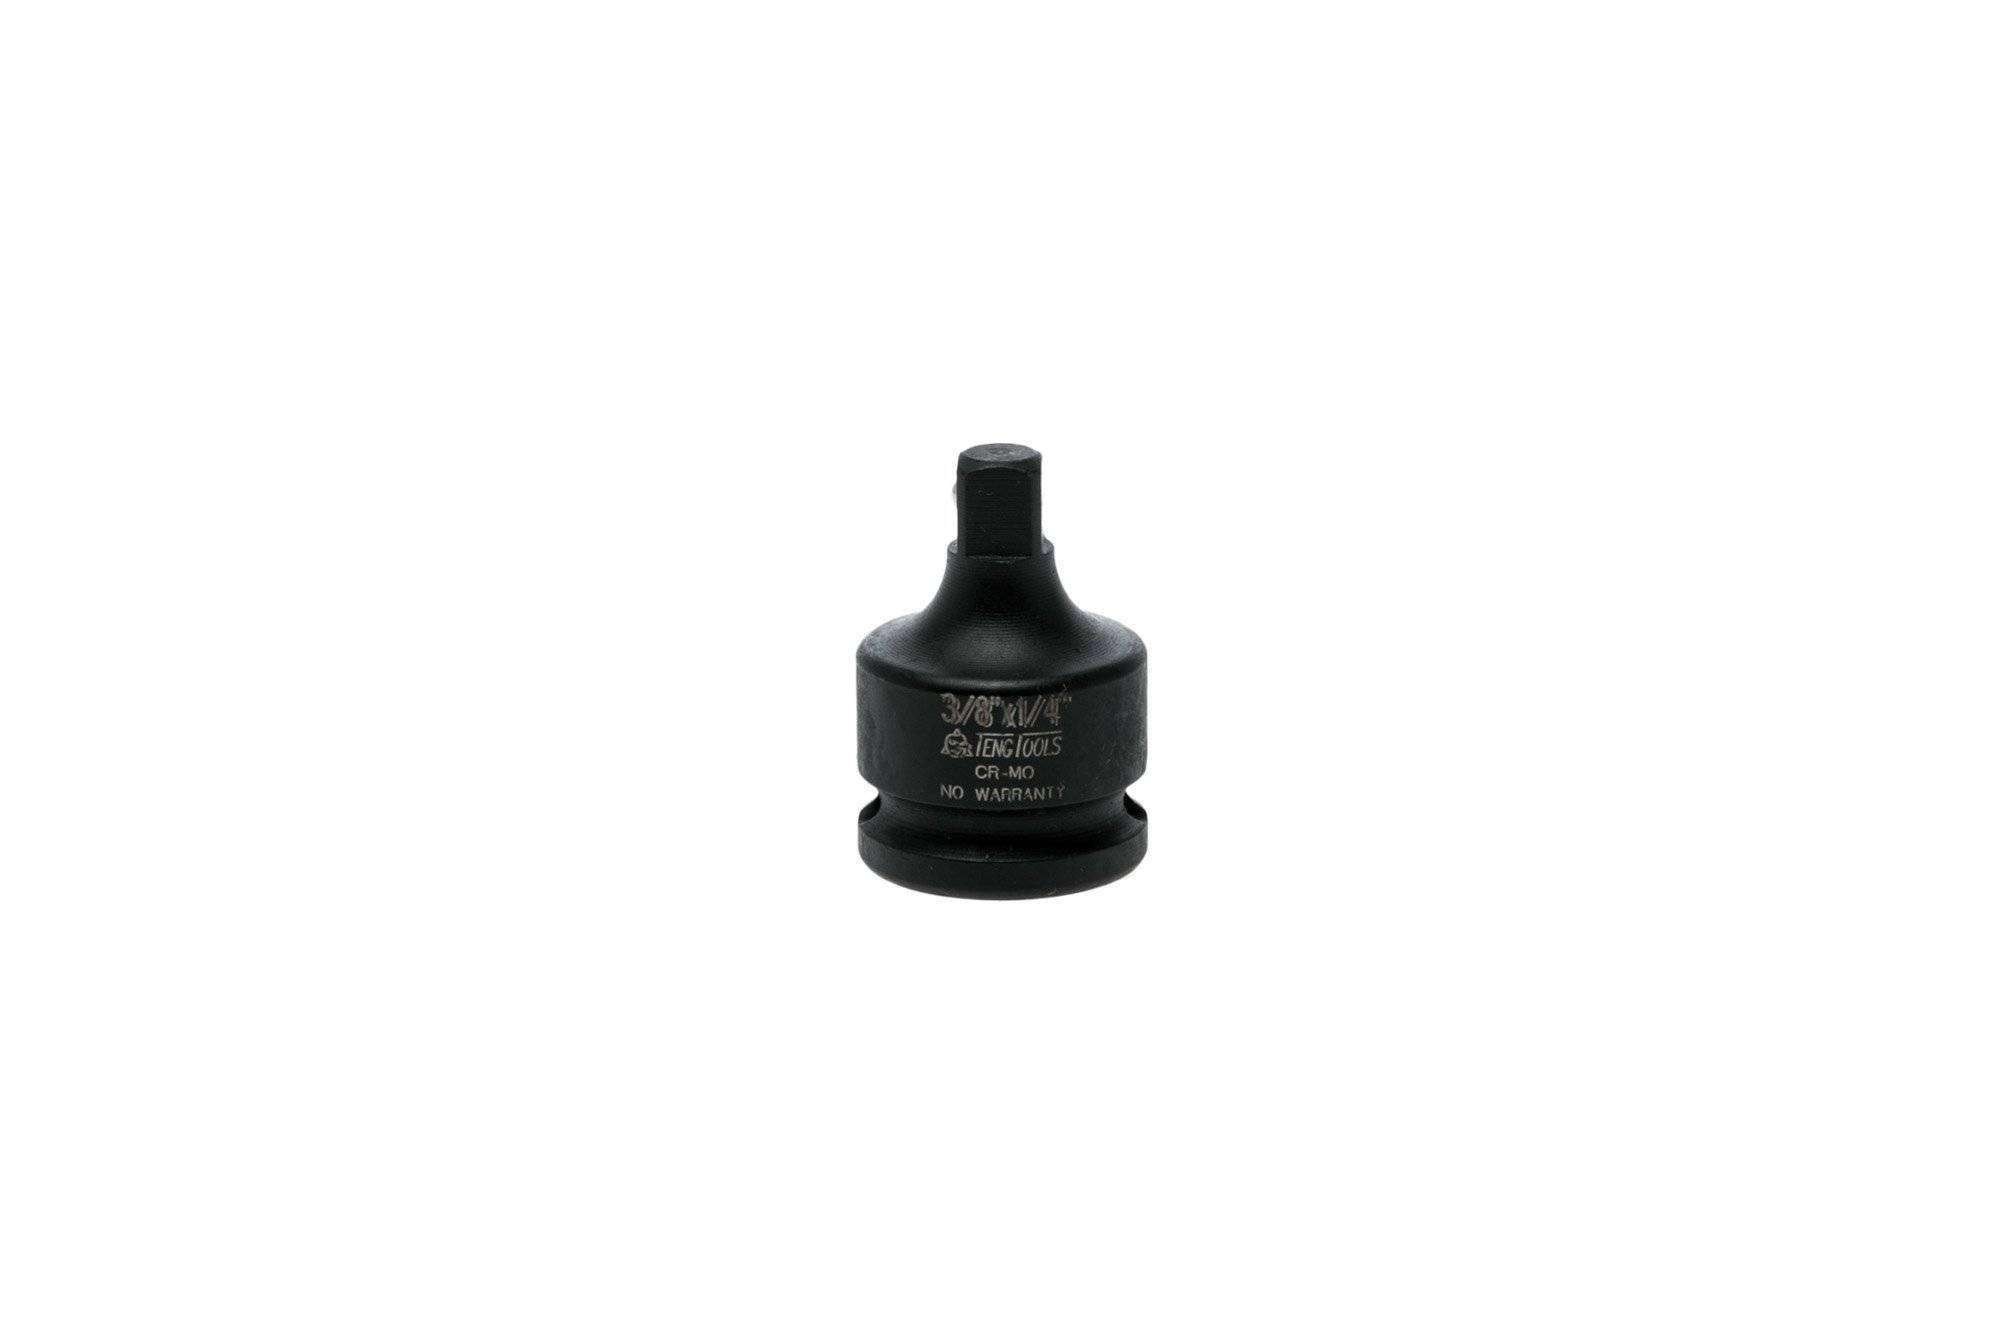 Teng Tools 3/8 Inch Drive Female to 1/4 Inch Drive Male Adaptor - 980035-C